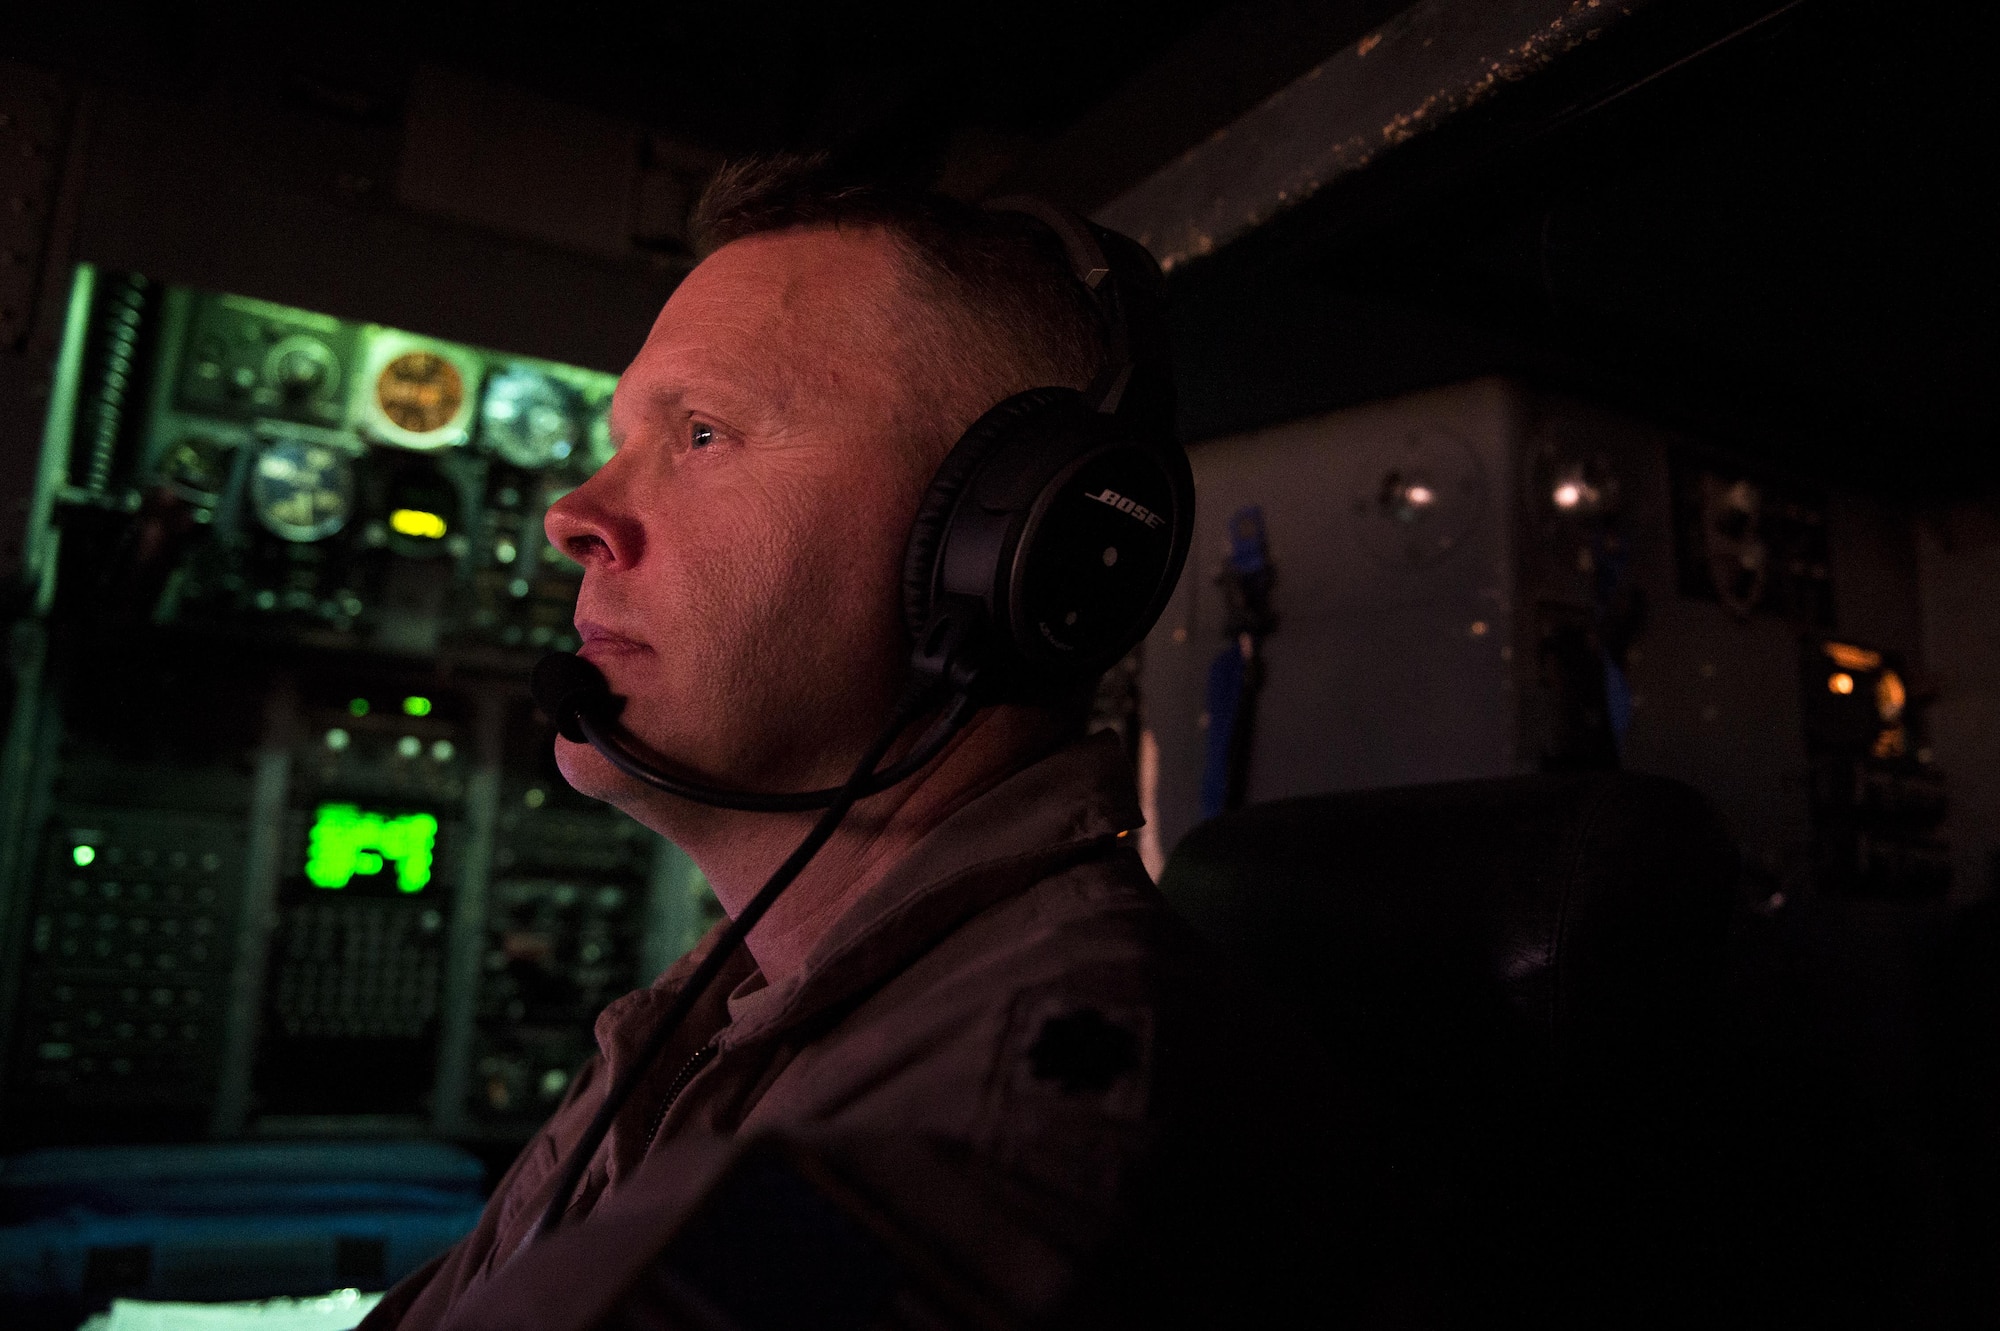 U.S. Air Force Lt. Col. Terry O'Grady, 746th Expeditionary Airlift Squadron, navigates the C-130H Hercules' flight path during a Aeromedical Evacuation in Southwest Asia in support of Operation Inherent Resolve, Jan. 6, 2016. OIR is the coalition intervention against the Islamic State of Iraq and the Levant. (U.S. Air Force photo by Tech. Sgt. Nathan Lipscomb)